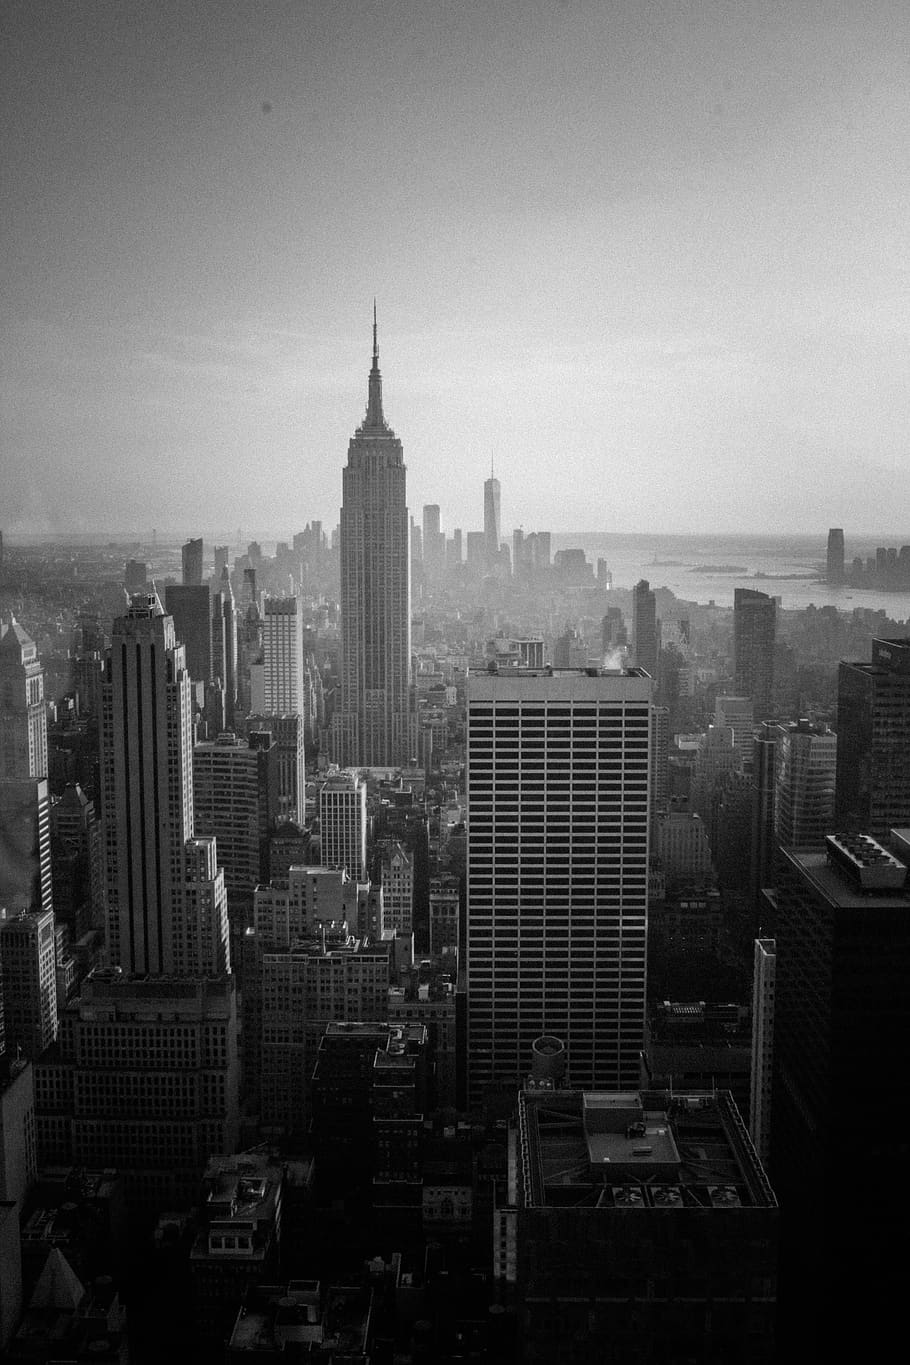 80+ New York Wallpaper Hd Black And White For FREE - MyWeb